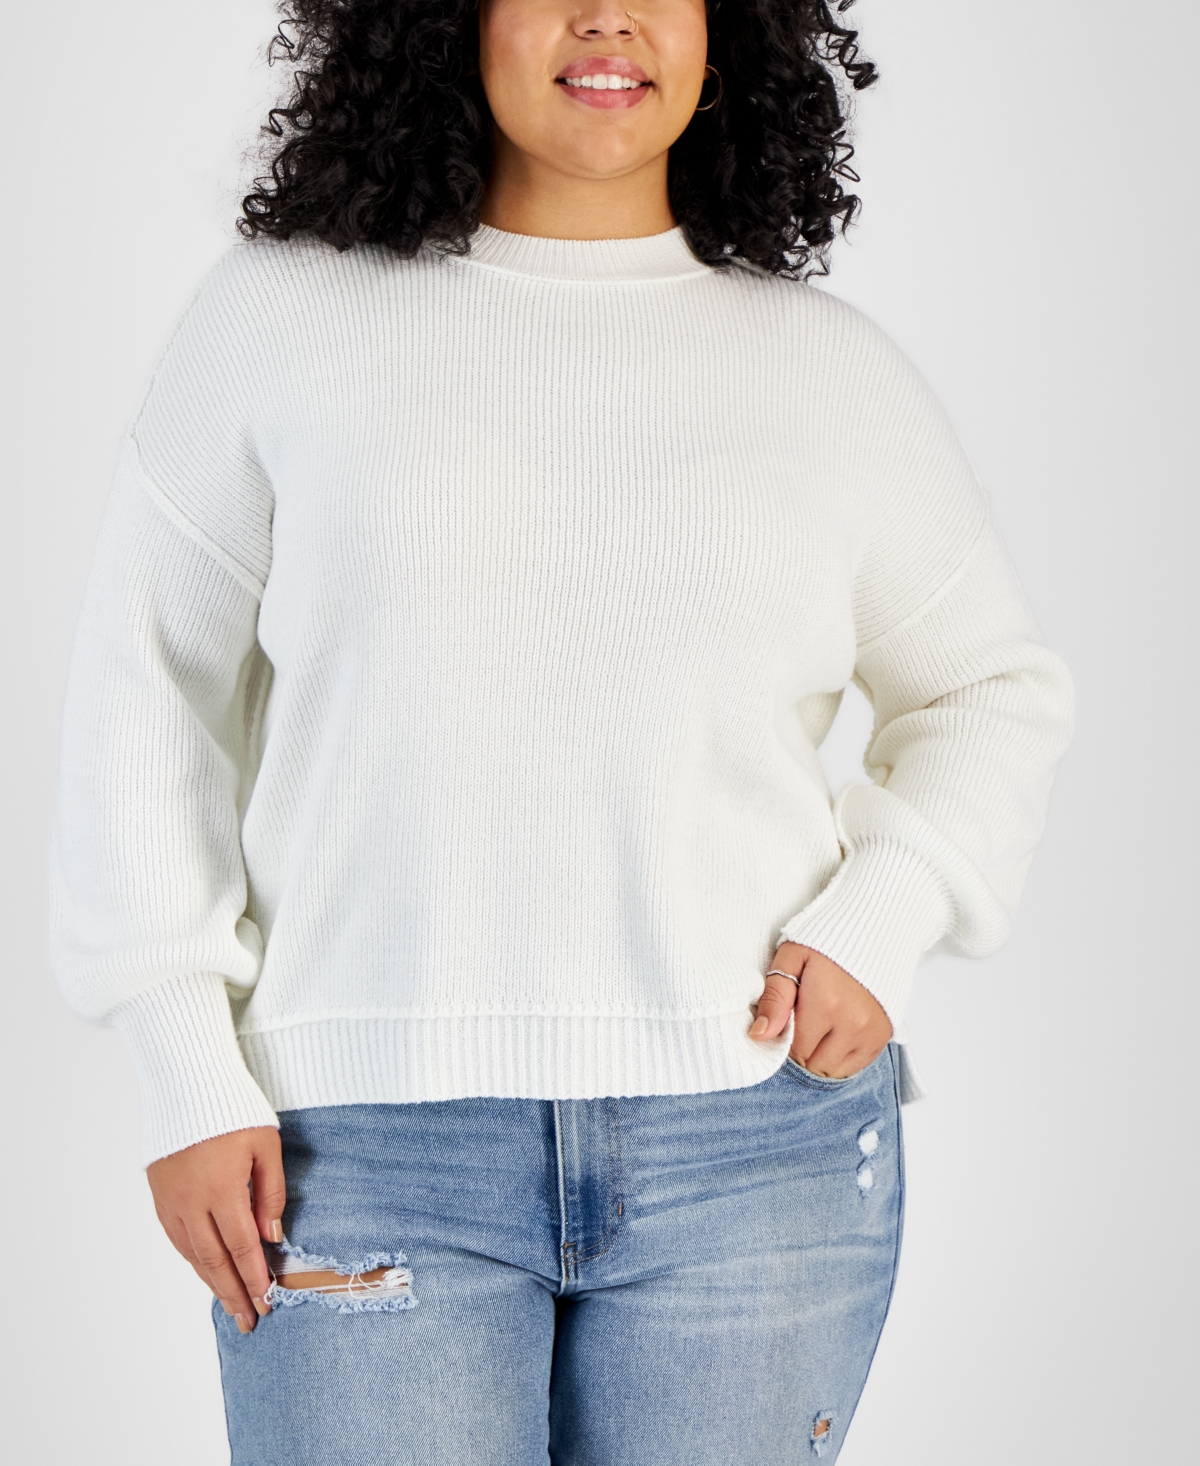 And Now This Trendy Plus Size Seam Sweater In Calla Lilly